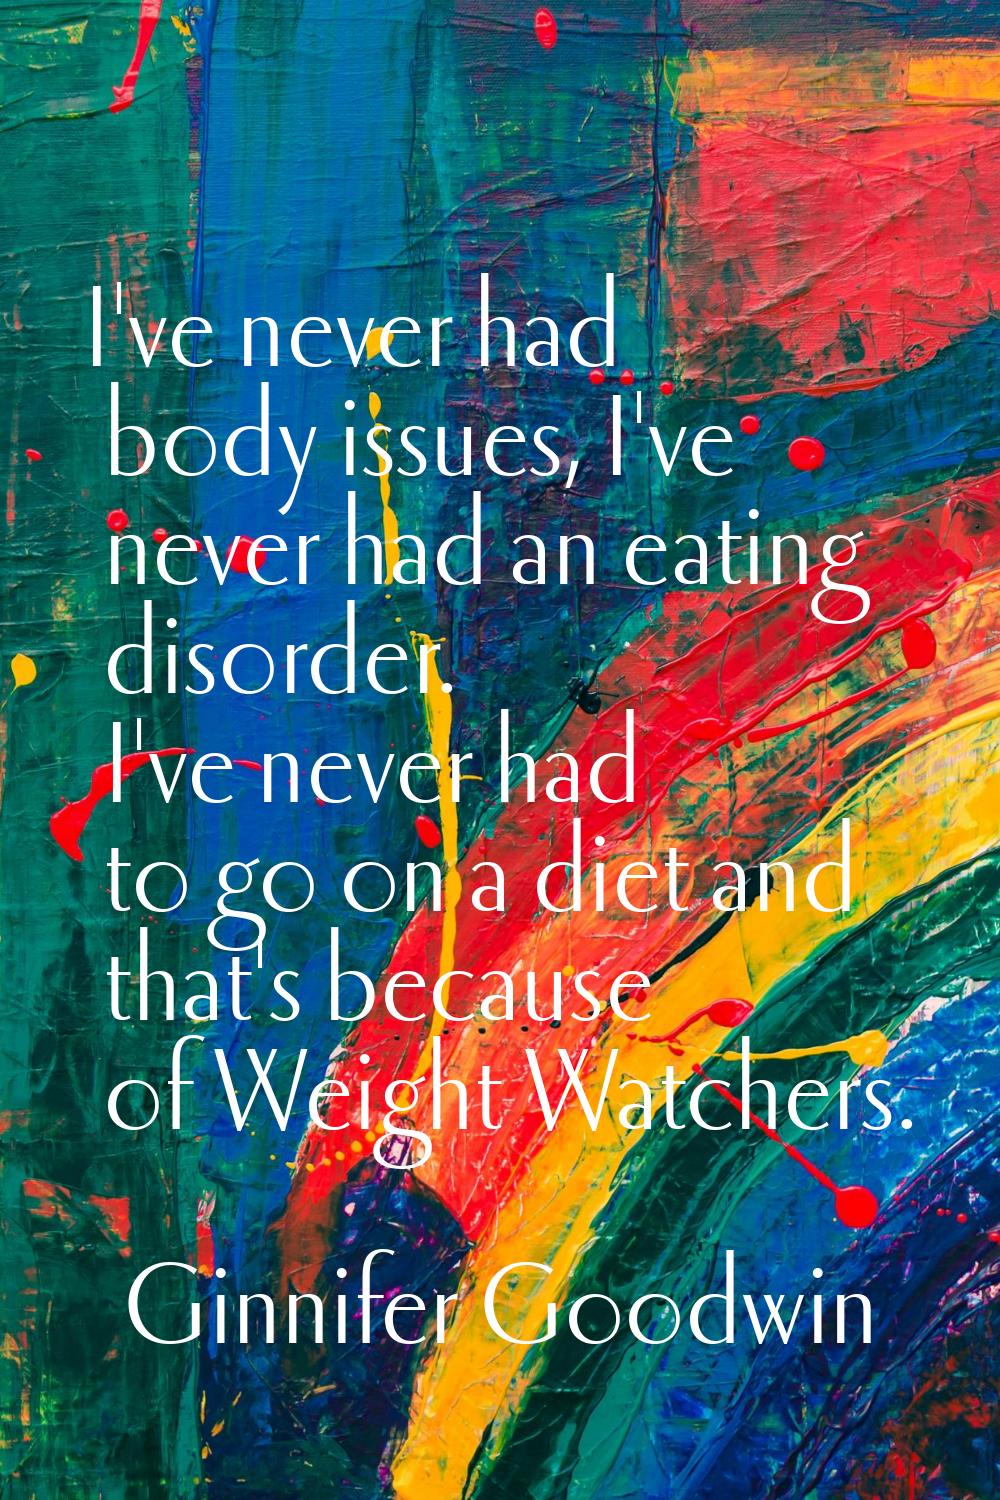 I've never had body issues, I've never had an eating disorder. I've never had to go on a diet and t